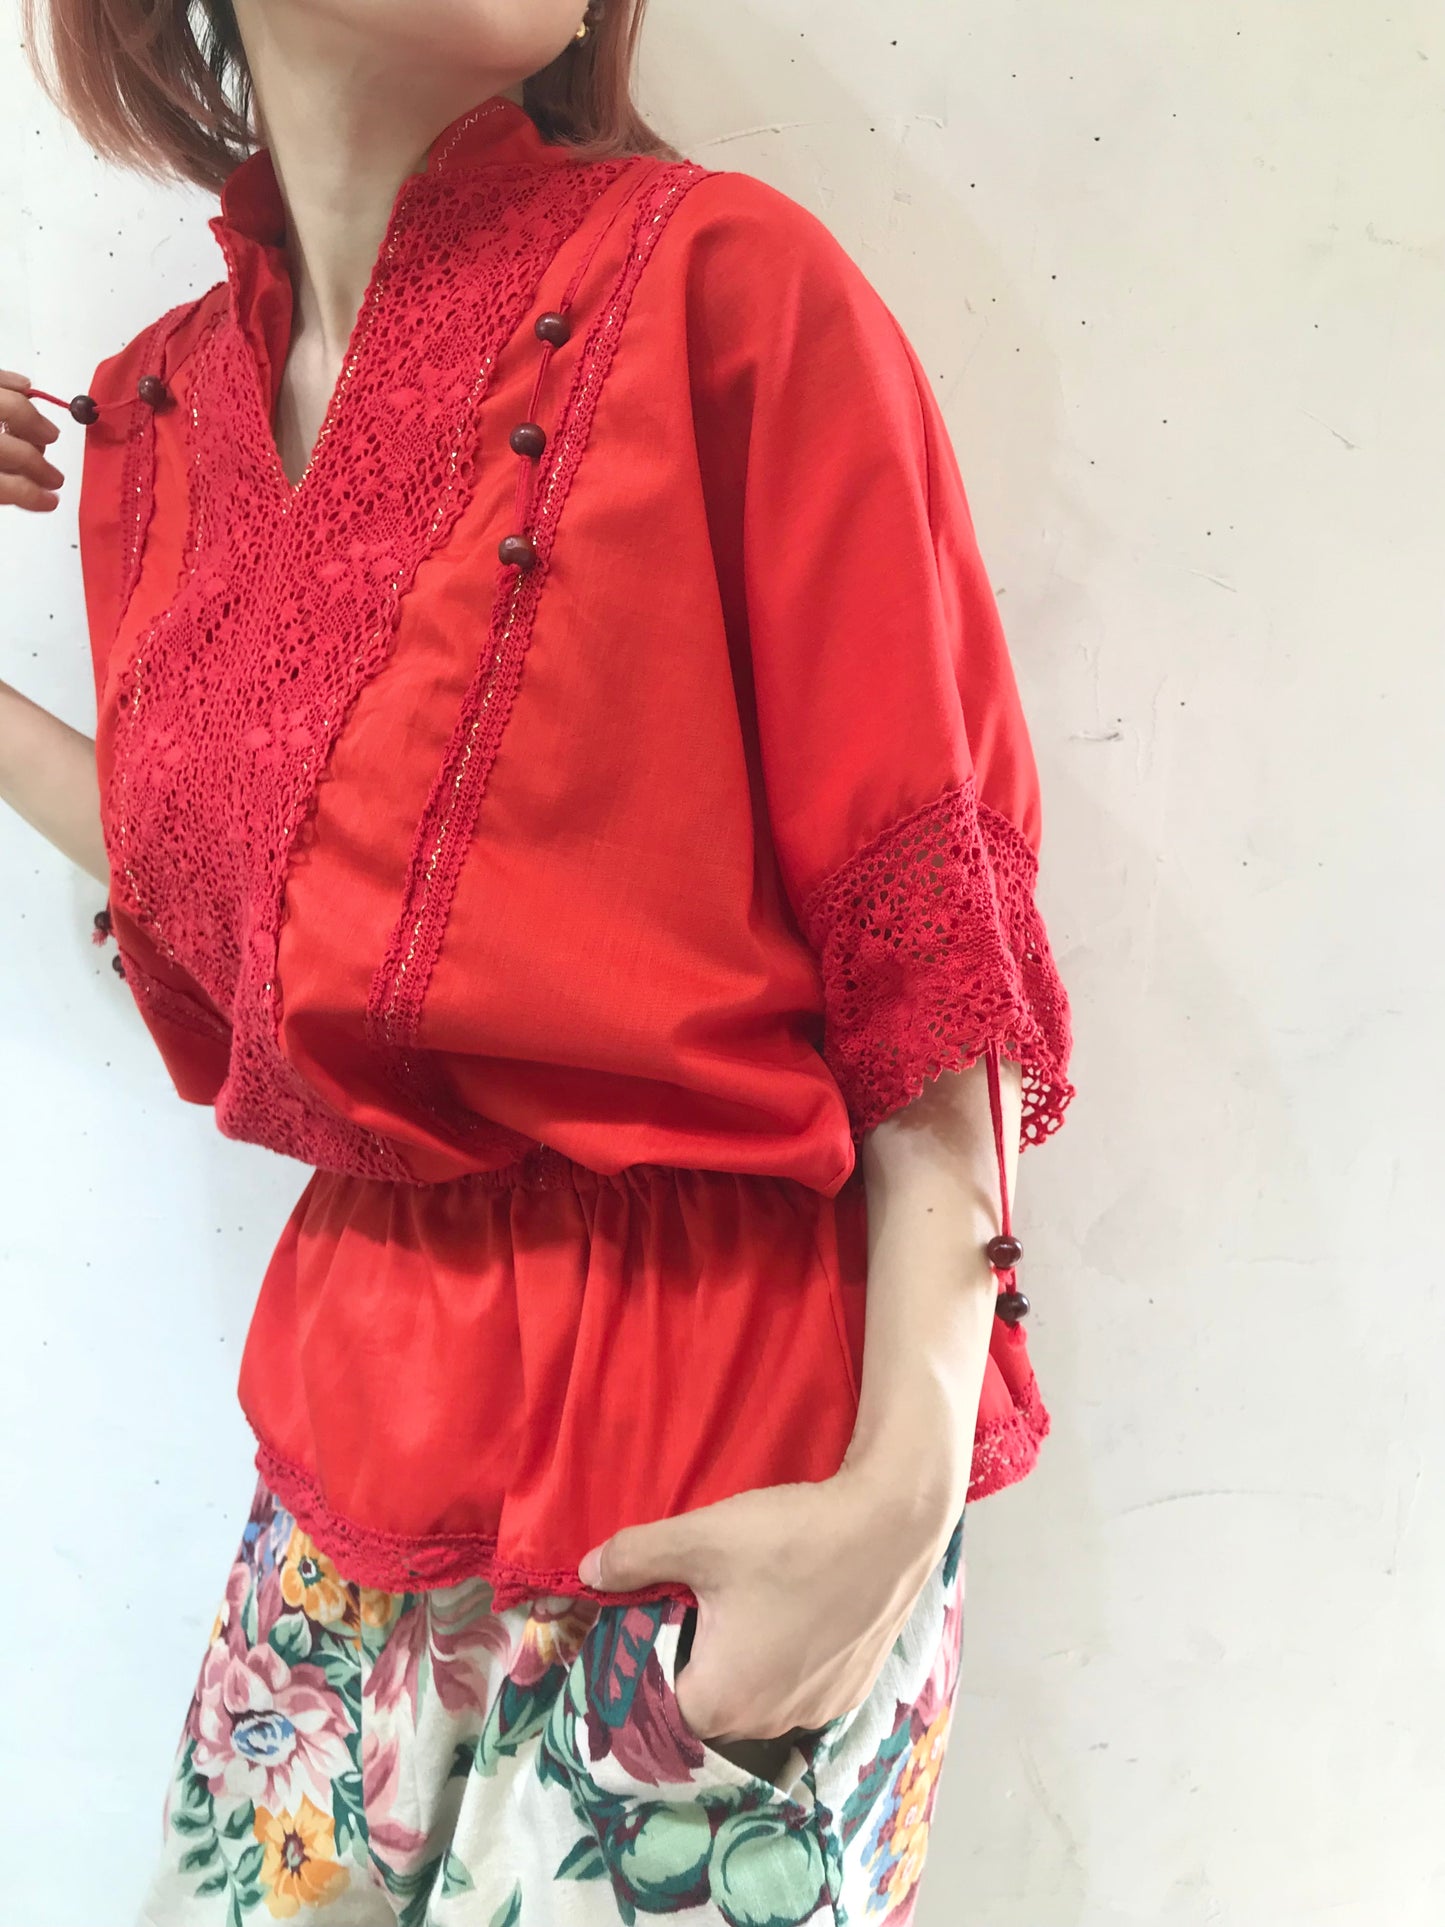 Vintage Crochet Lace Blouse 〜MADE IN ITALY〜[G24621]